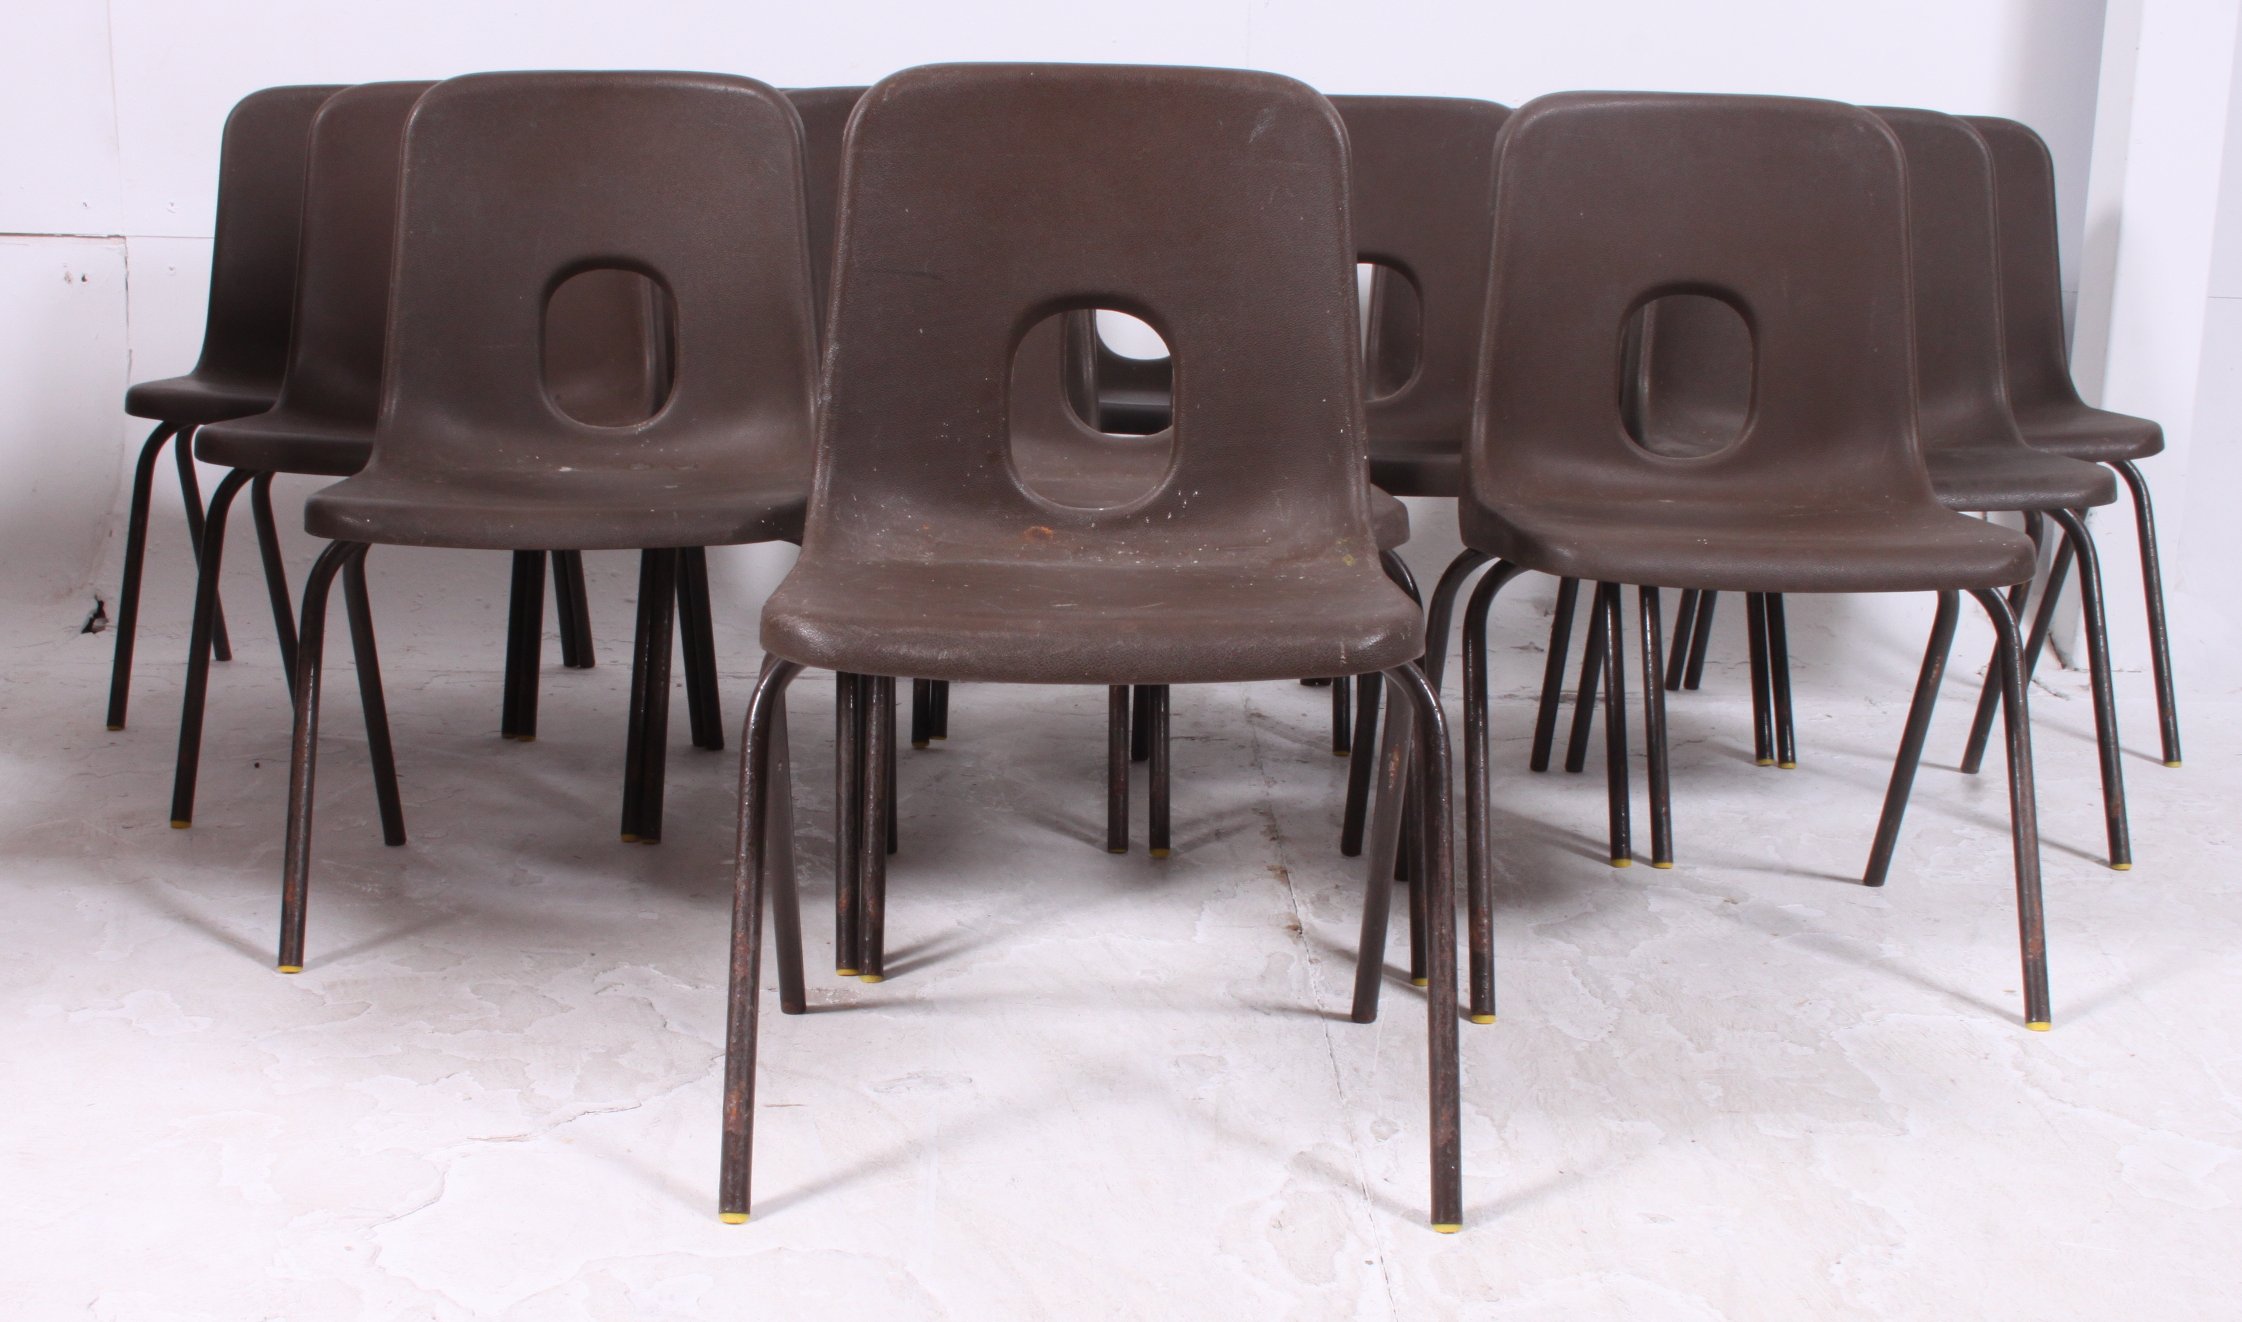 A stack of 13 vintage 1970's  Hille furniture plastic and tubular metal childrens school chairs.